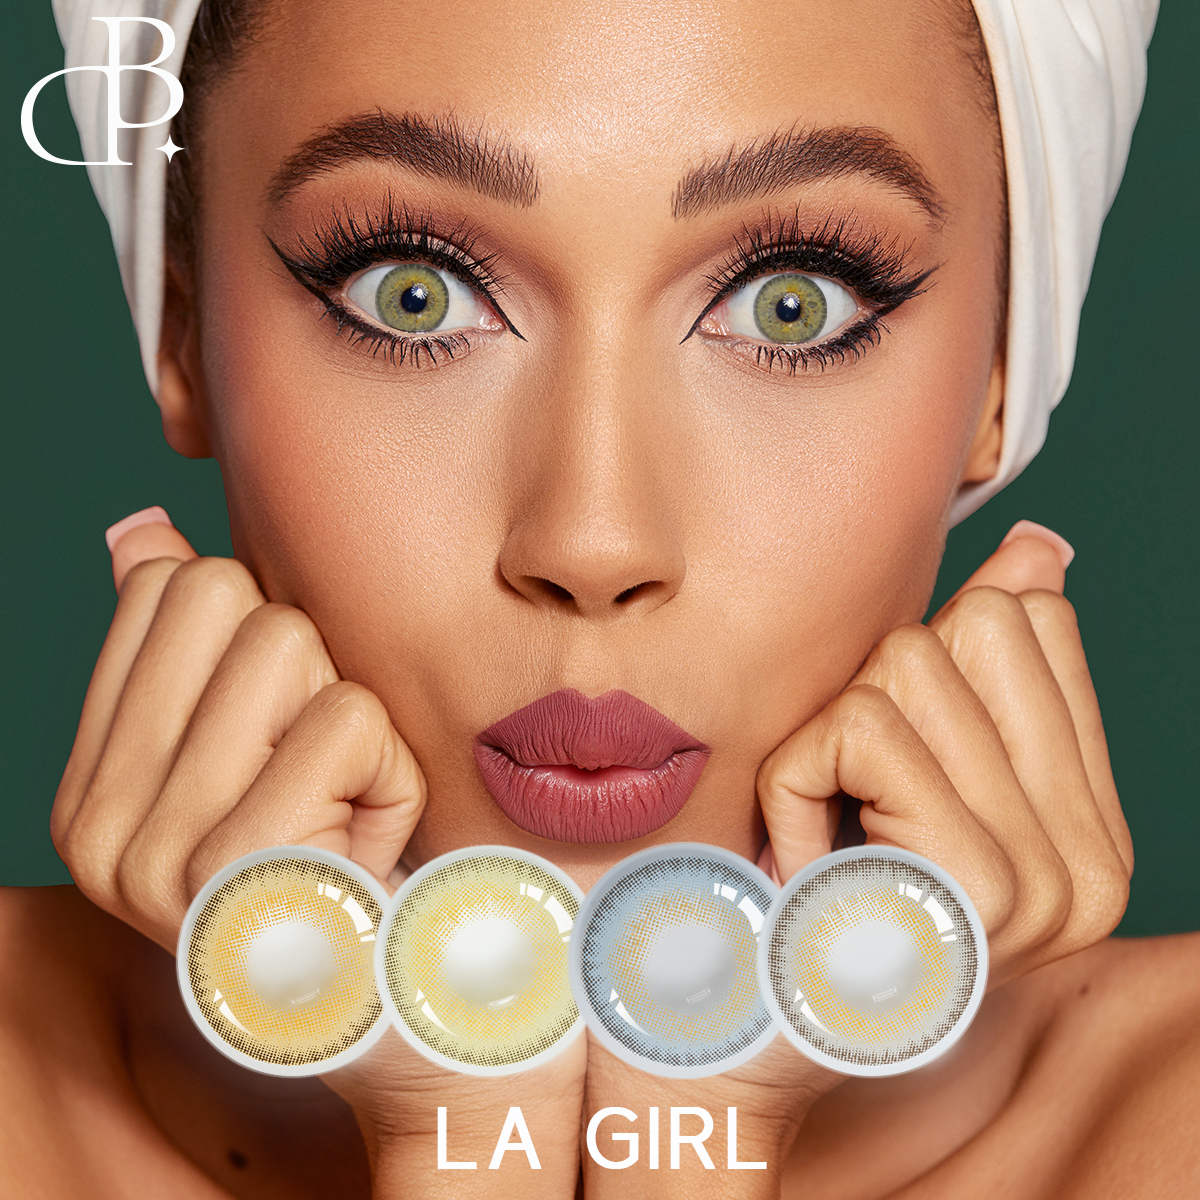 LA GIRL Fashion Hot Style Wholesale Color Contact Lenses Customized Private Label Cheap To Win Warm Praise From Customers